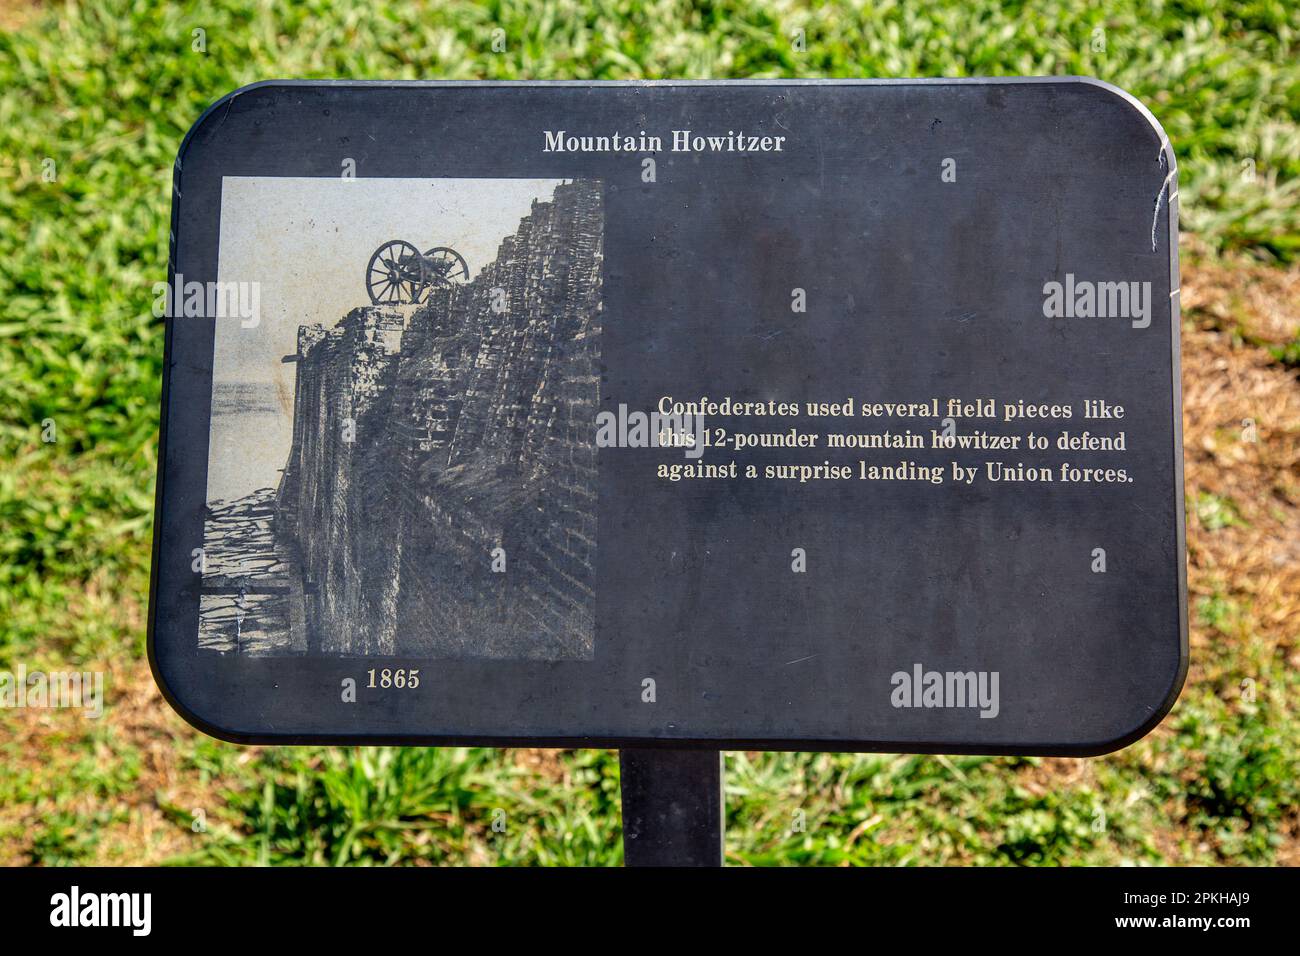 This sign at the Fort Sumter National Monument in Charleston, SC describes the Mountain Howitzer and its use by the Confederacy during the Civil War. Stock Photo